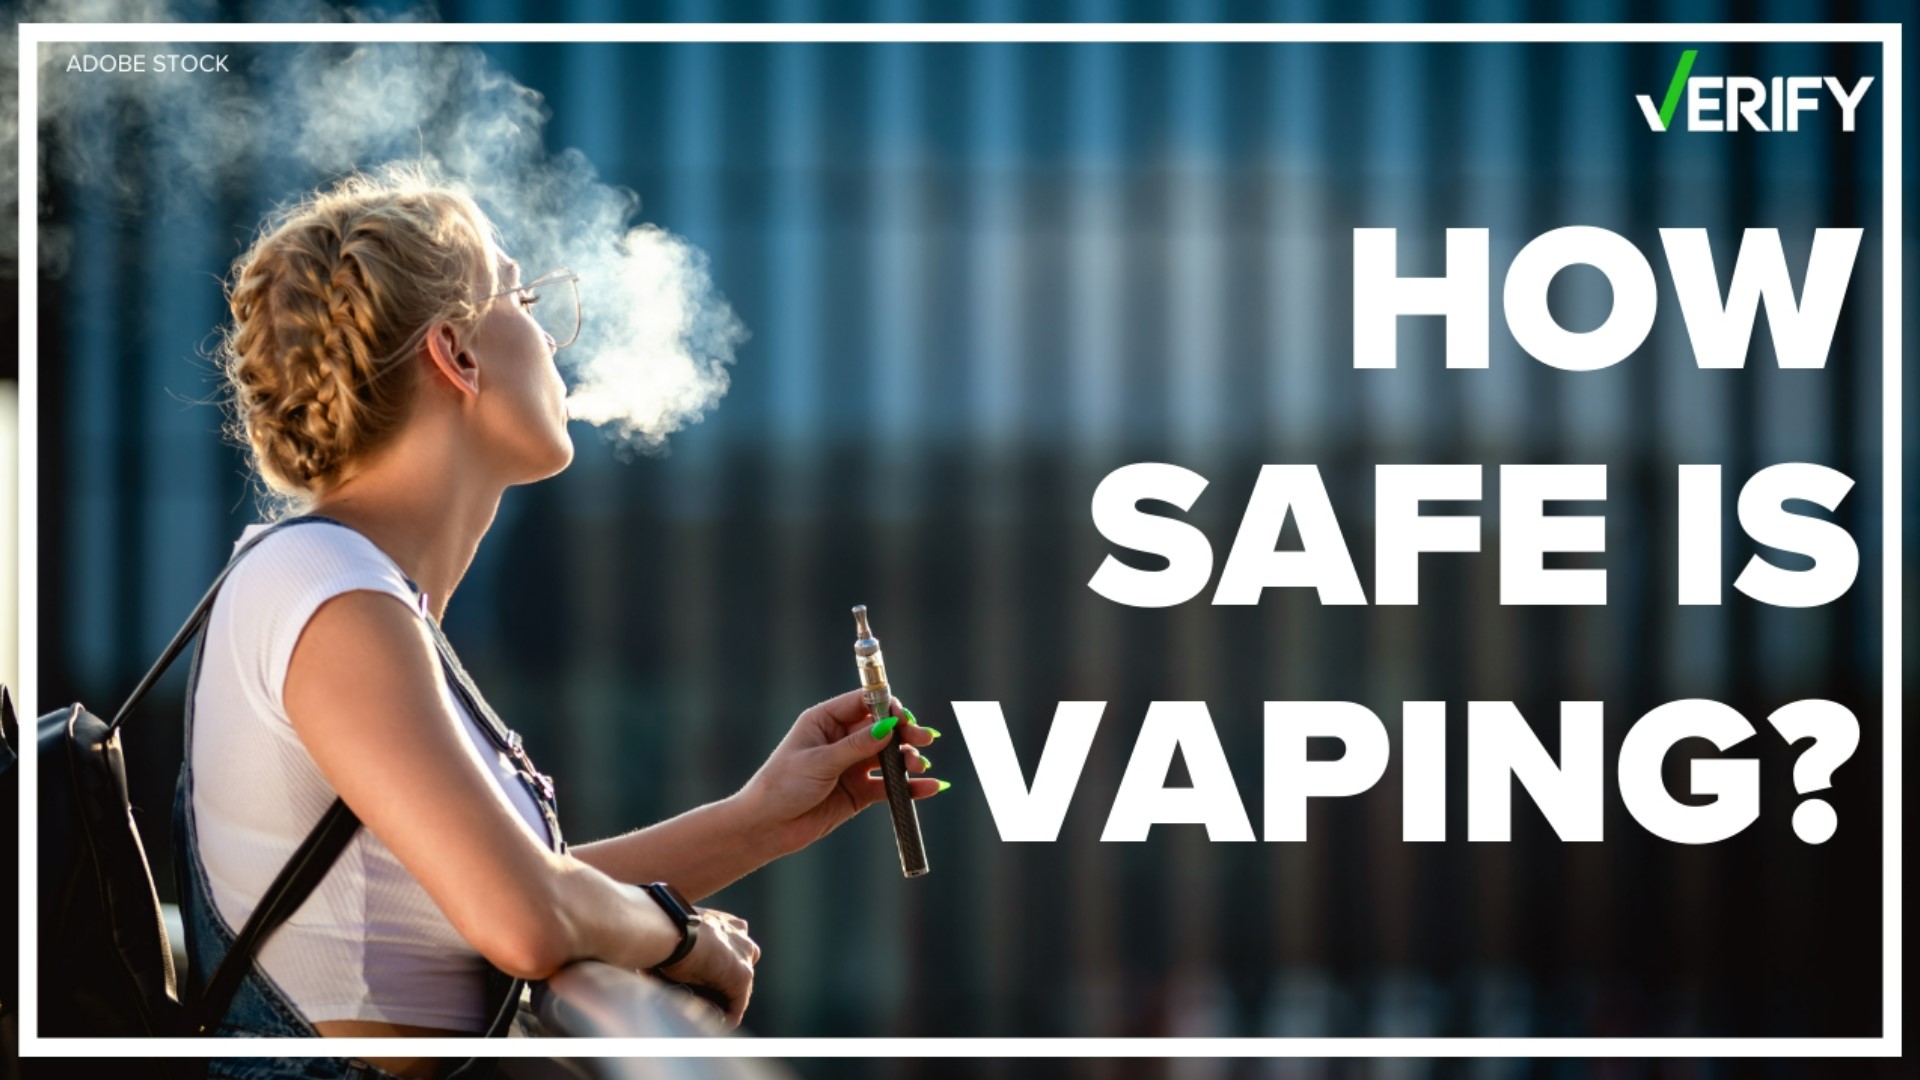 Following the FDA ban on JUUL products, some have falsely claimed that THC products with vitamin E acetate are the sole cause of vaping illnesses and deaths.